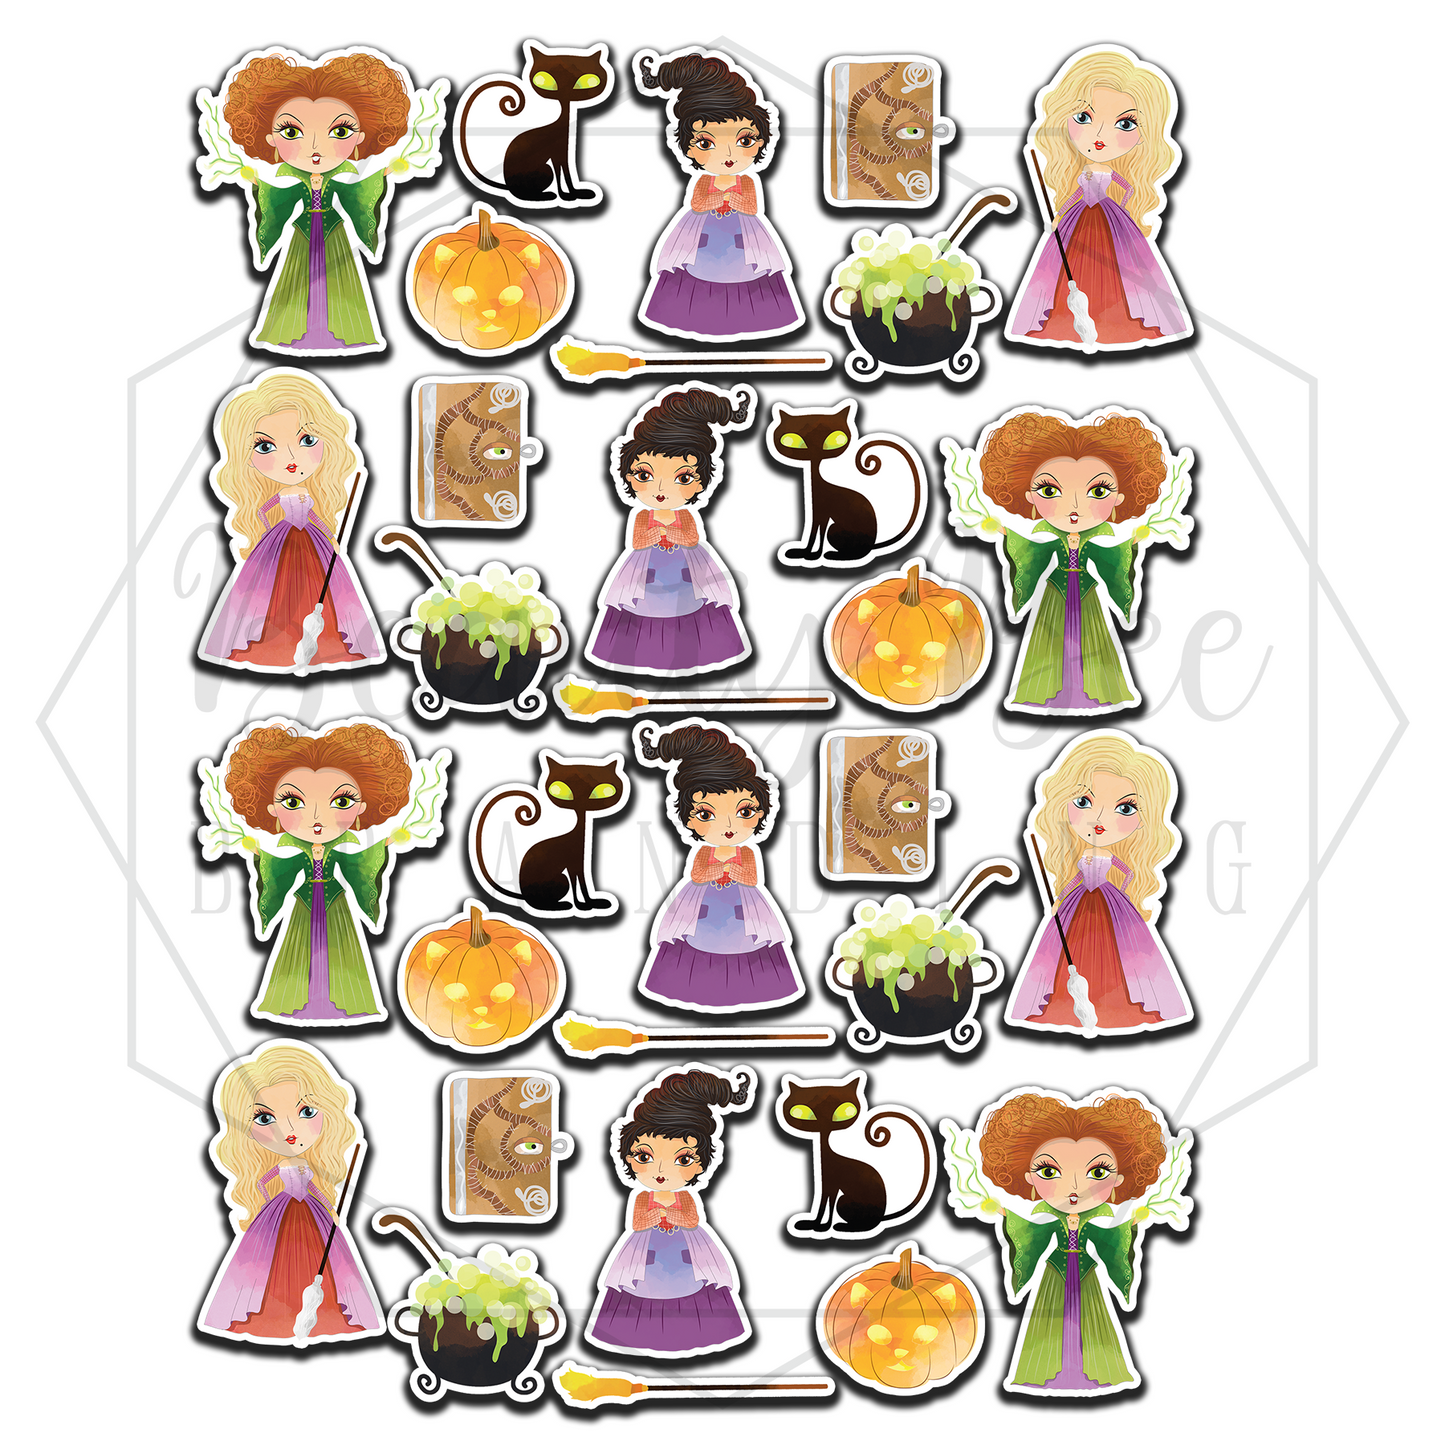 Sister Witches Sticker Sheet